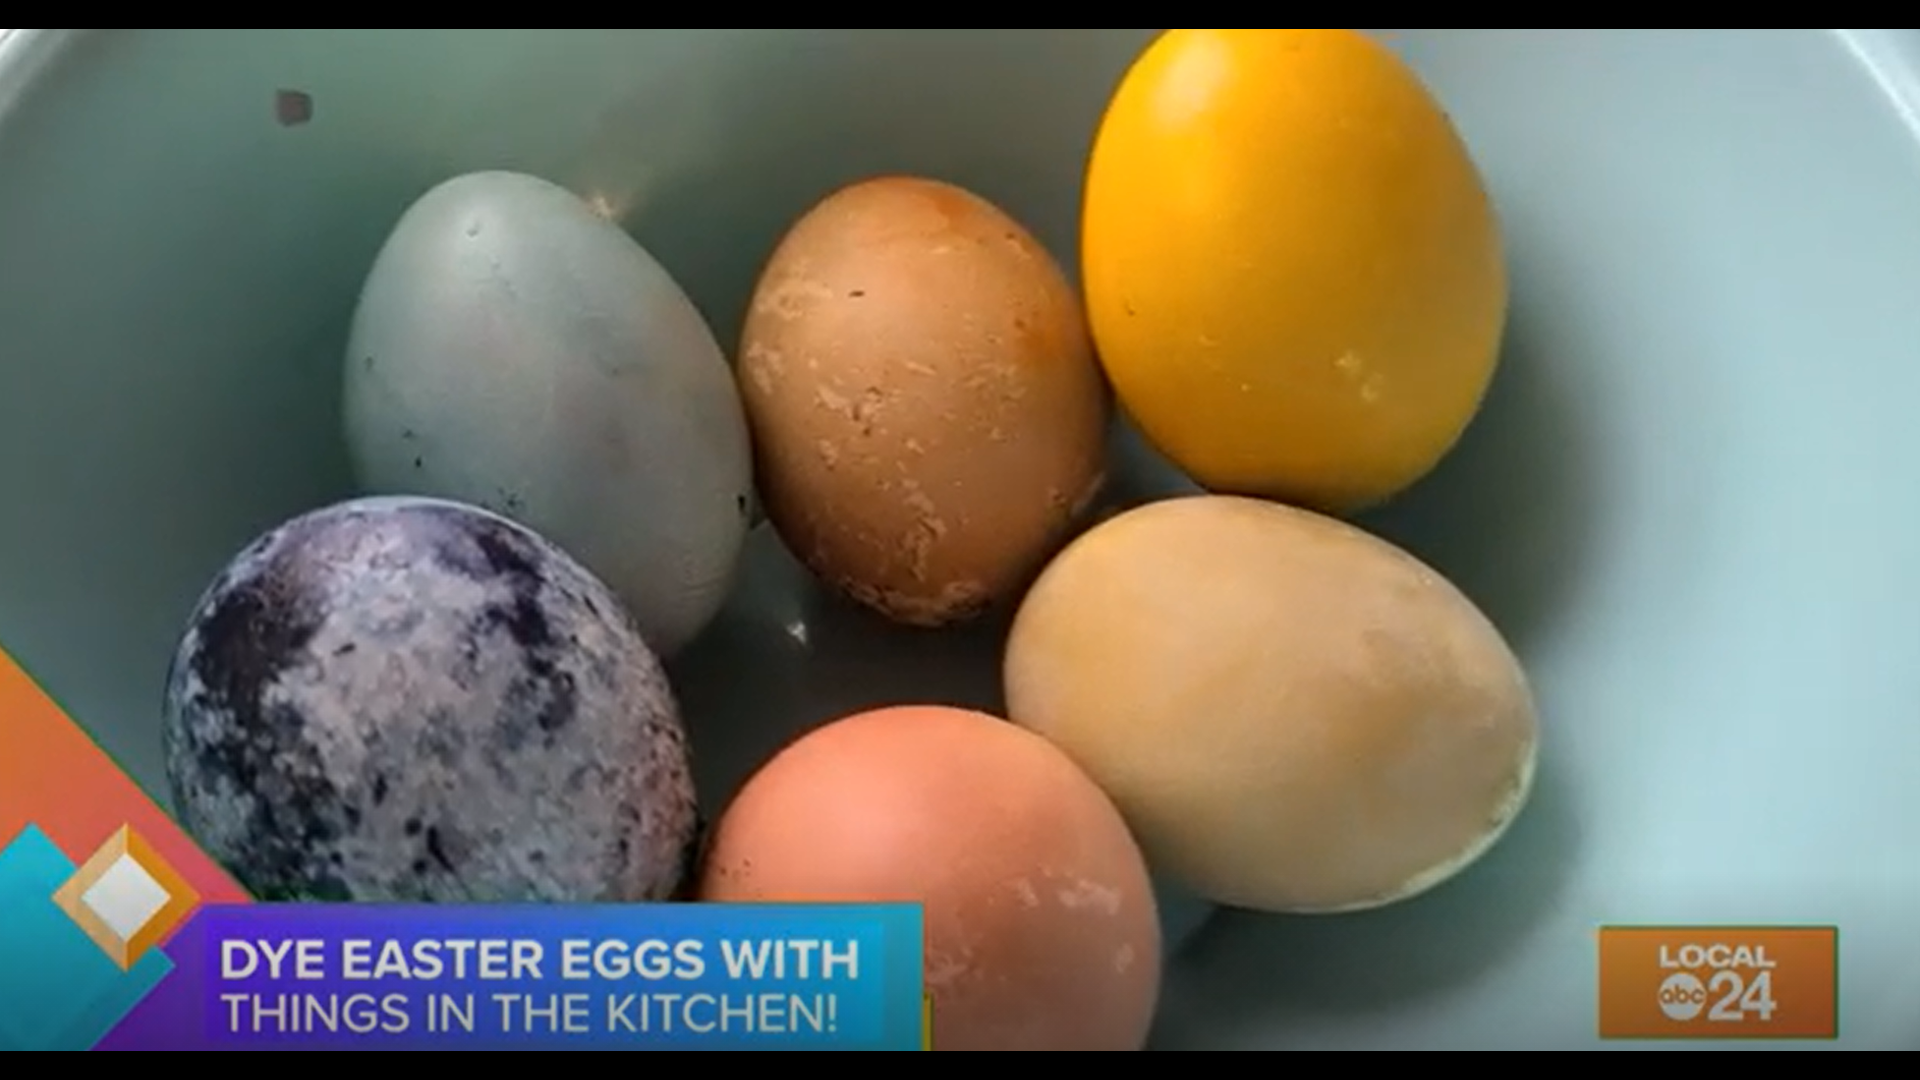 Looking to celebrate Easter a little differently this year? Check out this free all-natural DIY dyed eggs tutorial courtesy of your beloved host, Sydney Neely! :)